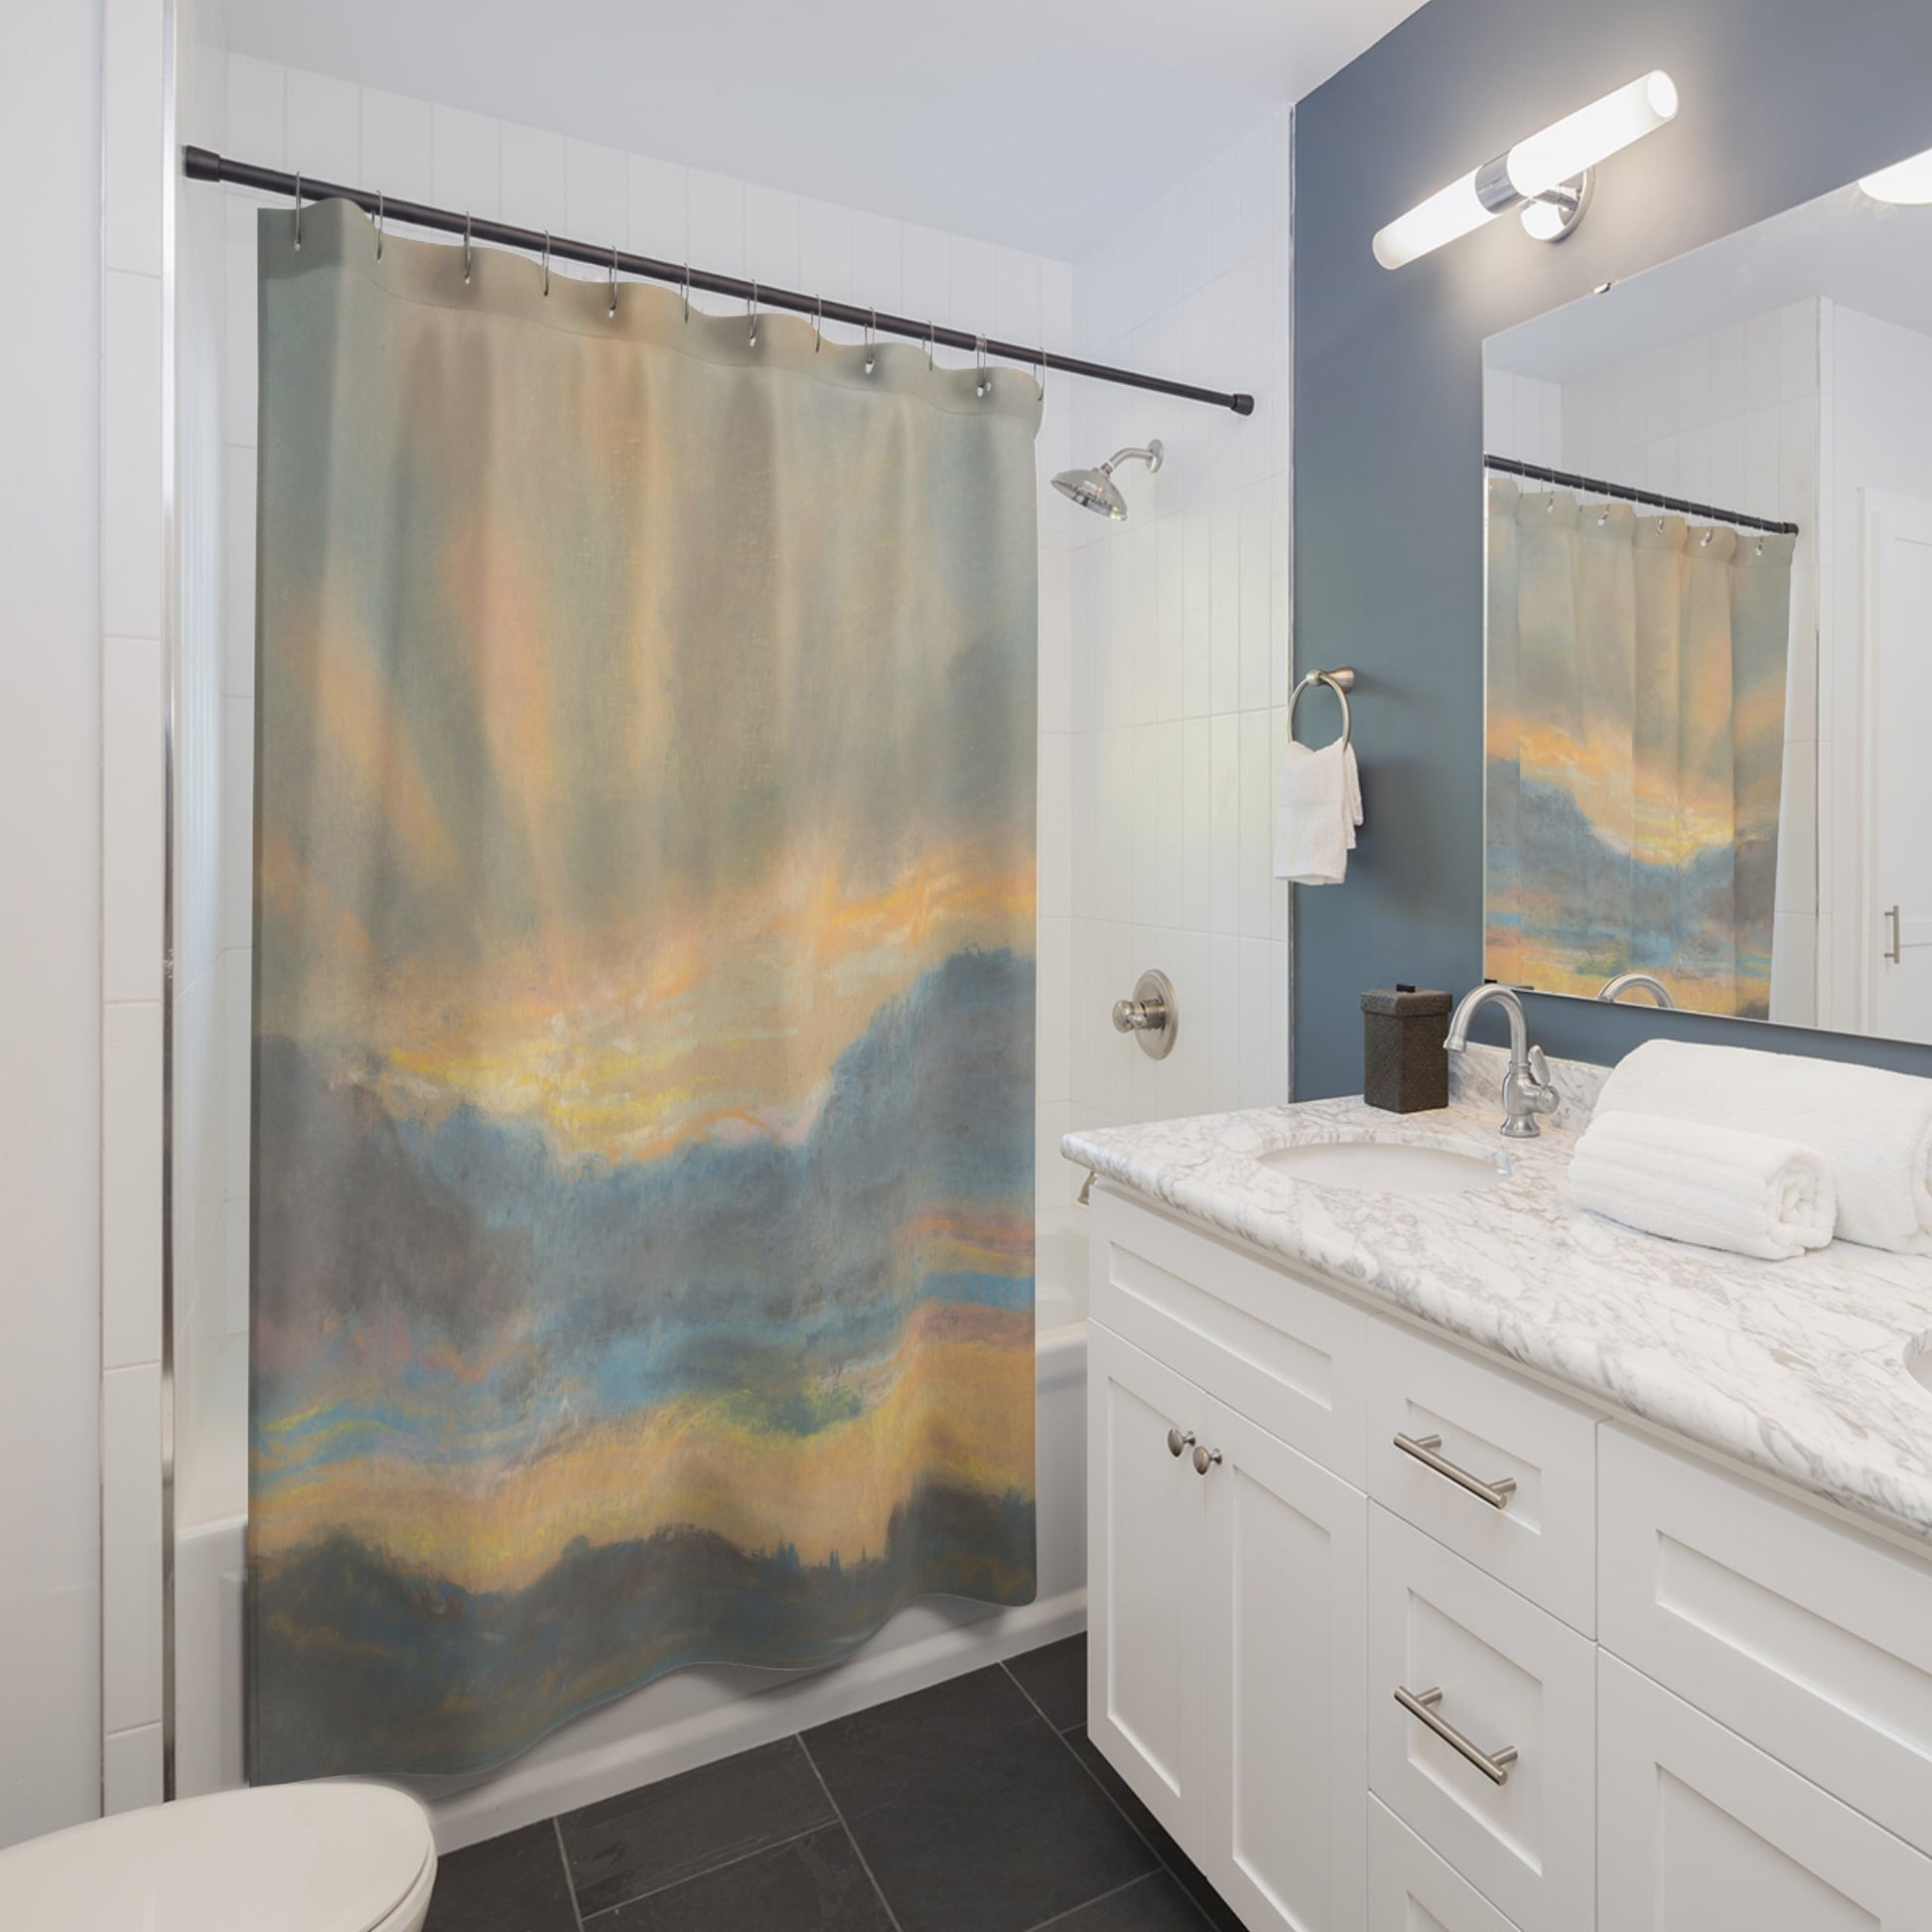 Sun in the Clouds Shower Curtain Best Bathroom Decorating Ideas for Landscapes Decor